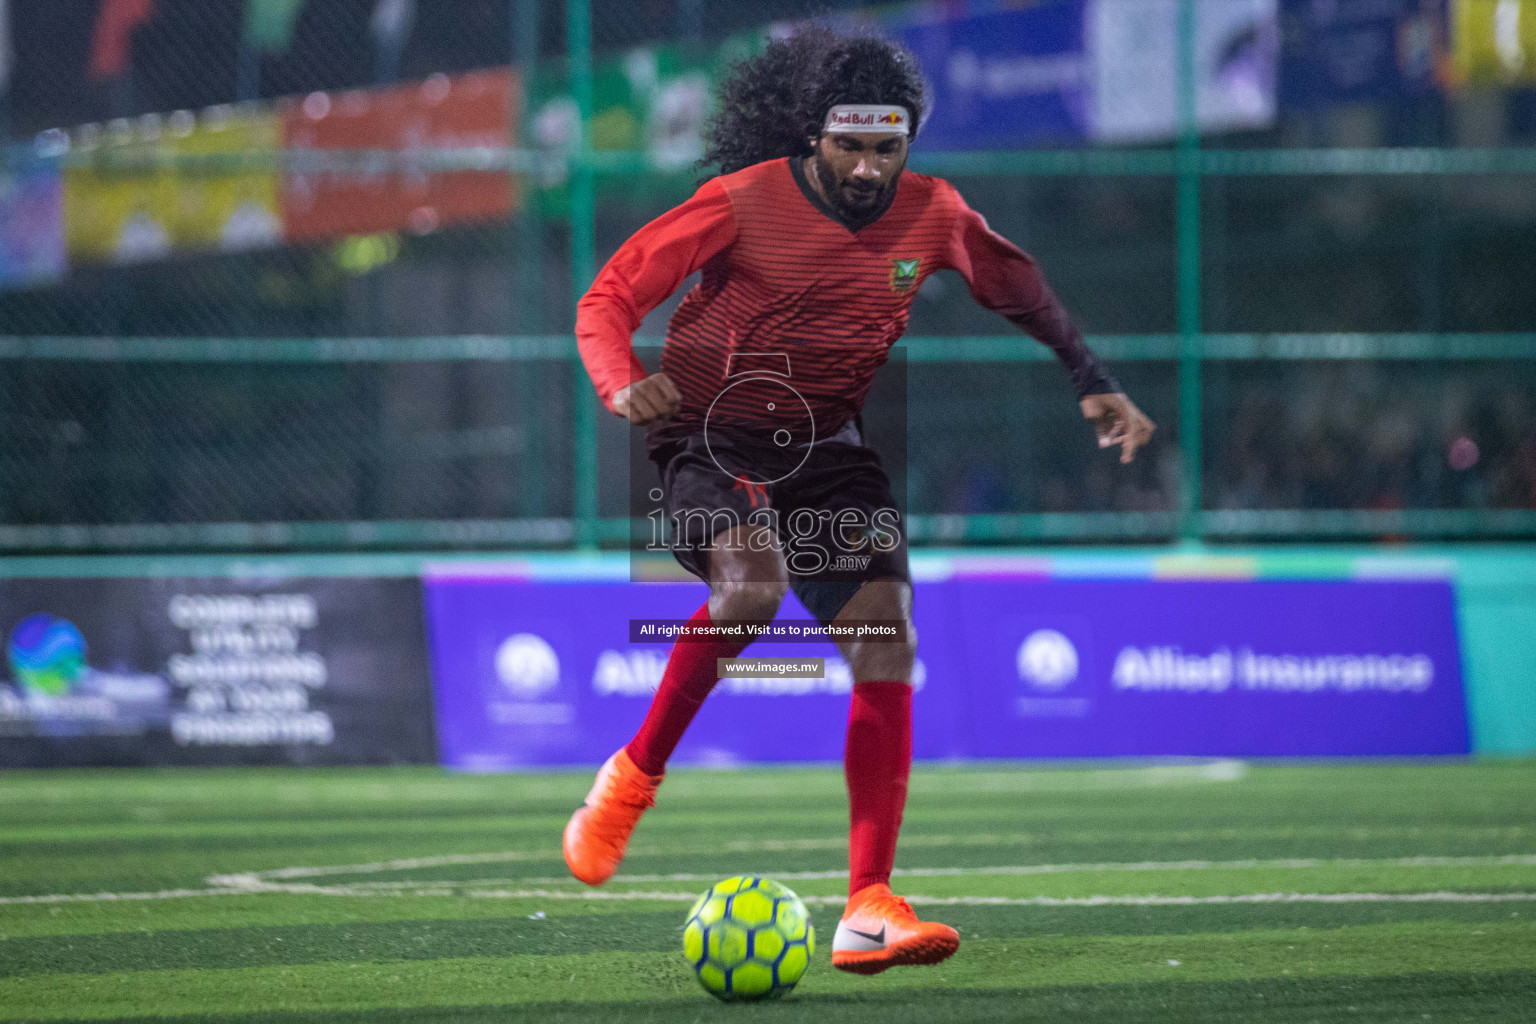 Semi finals of Club Maldives Cup 2019 on 30th April 2019, held in Hulhumale. Photos: Ismail Thoriq / images.mv